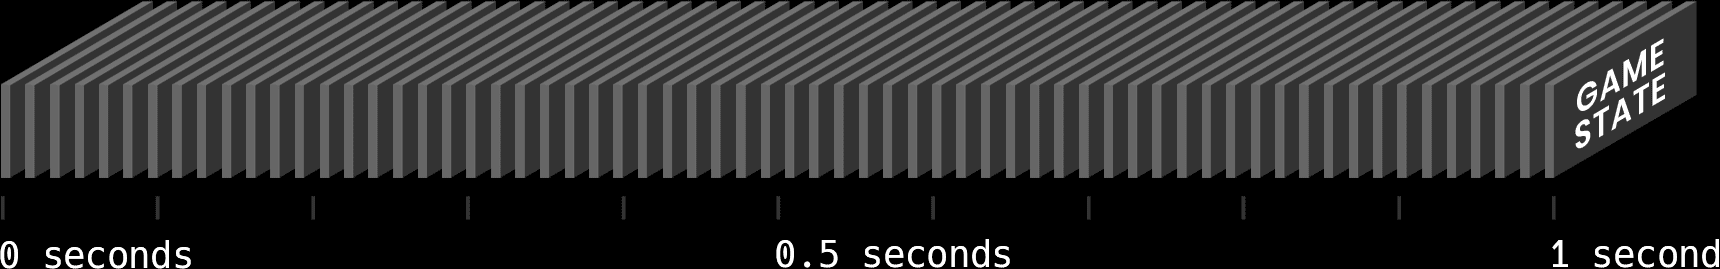 An isometric timeline covering 1 second, with 64 separate game states being transmitted from a game server - this represents a 64-tick game server